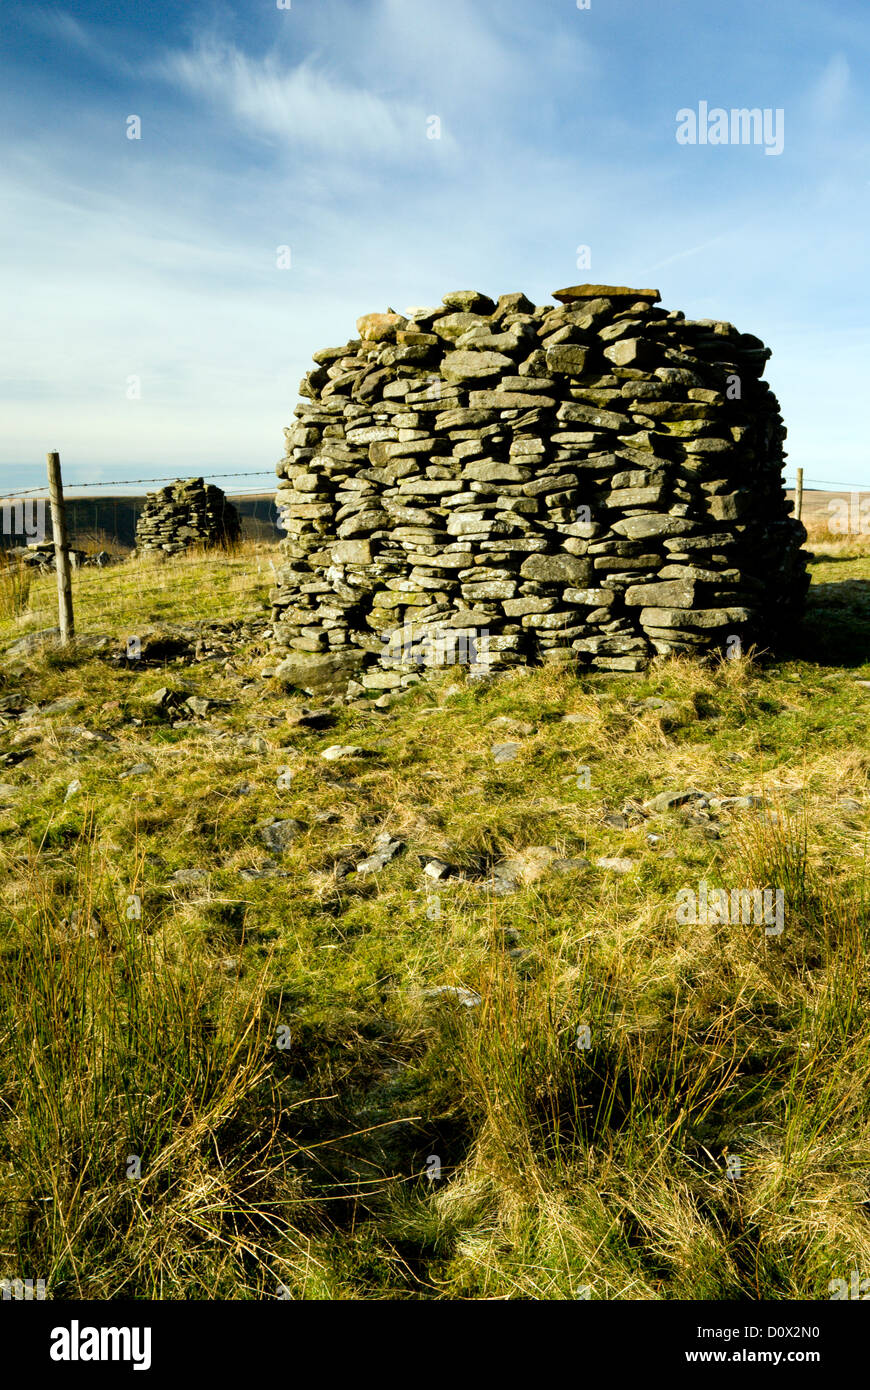 carn fawr ancient monument mynydd william meyrick above the ogwr valley south wales uk Stock Photo